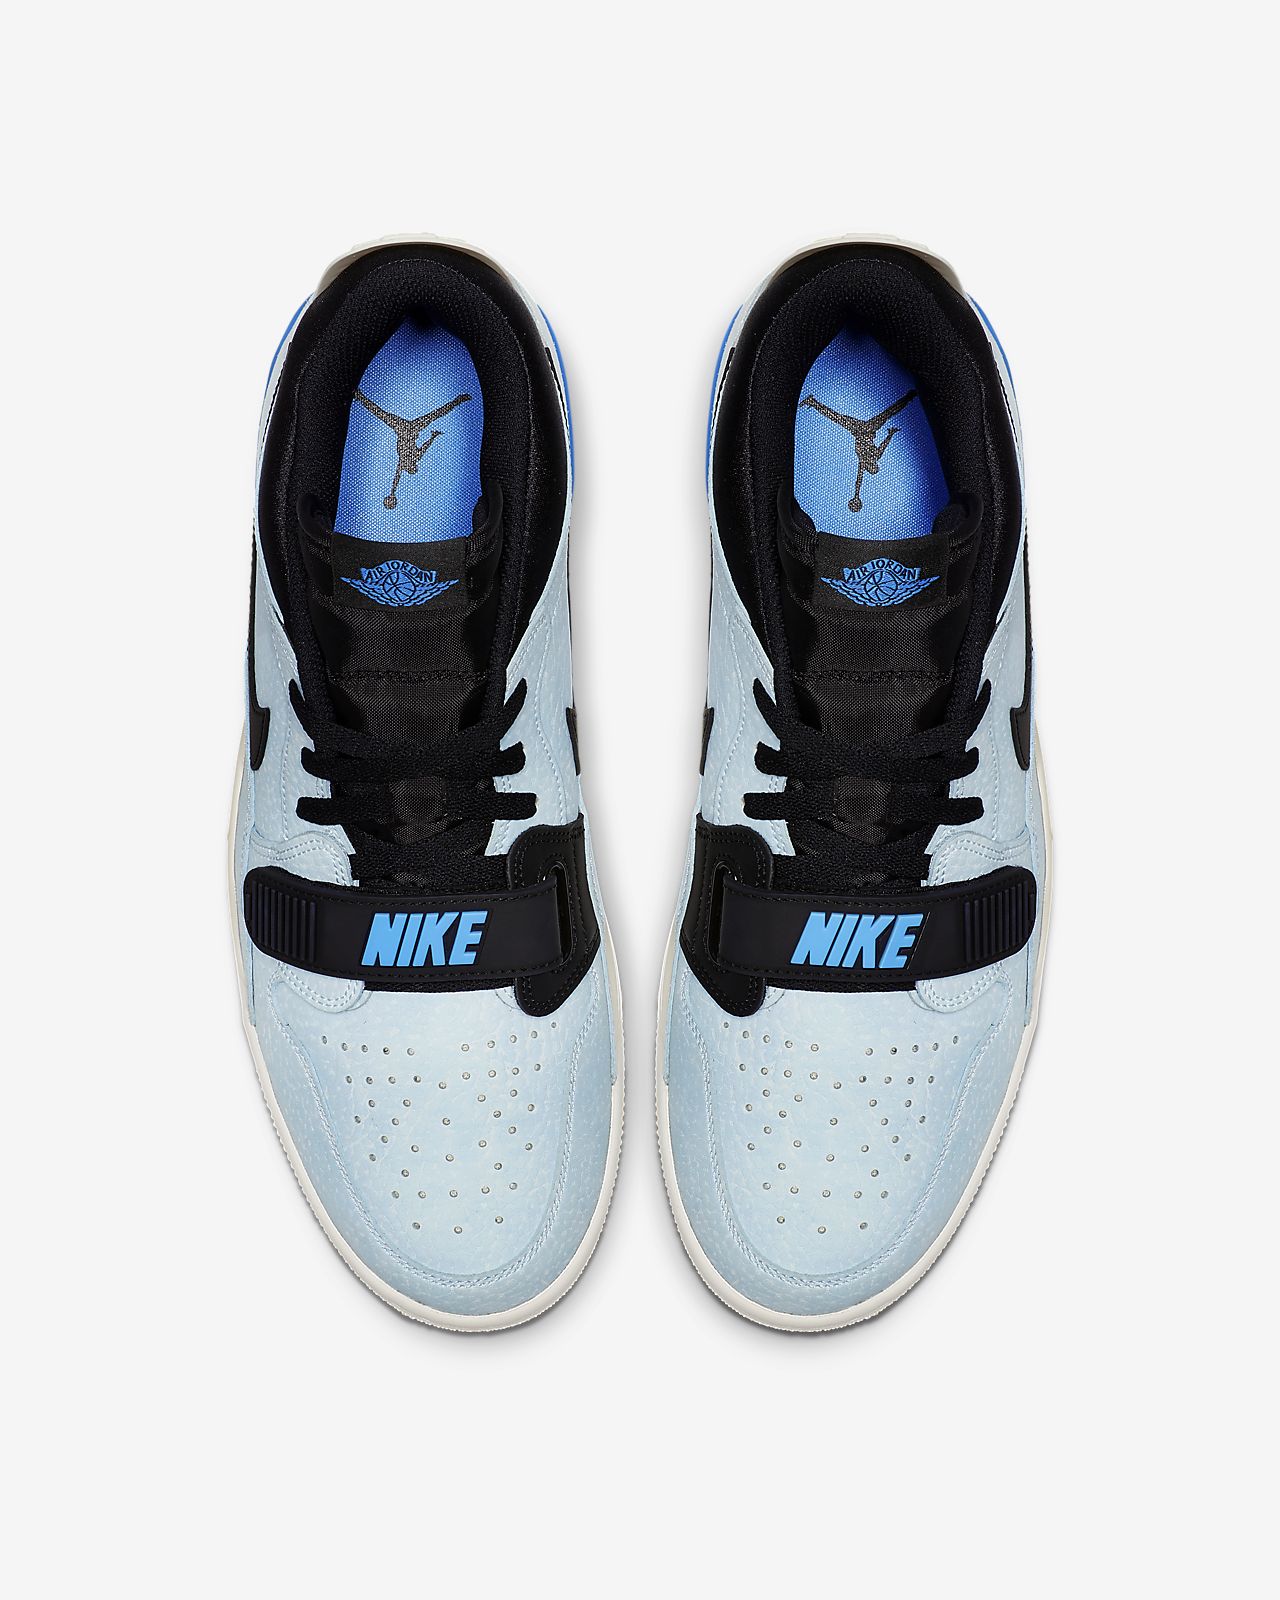 Nike Air Jordan Legacy 312 Low Pale Blue Up To 73 Off In Stock